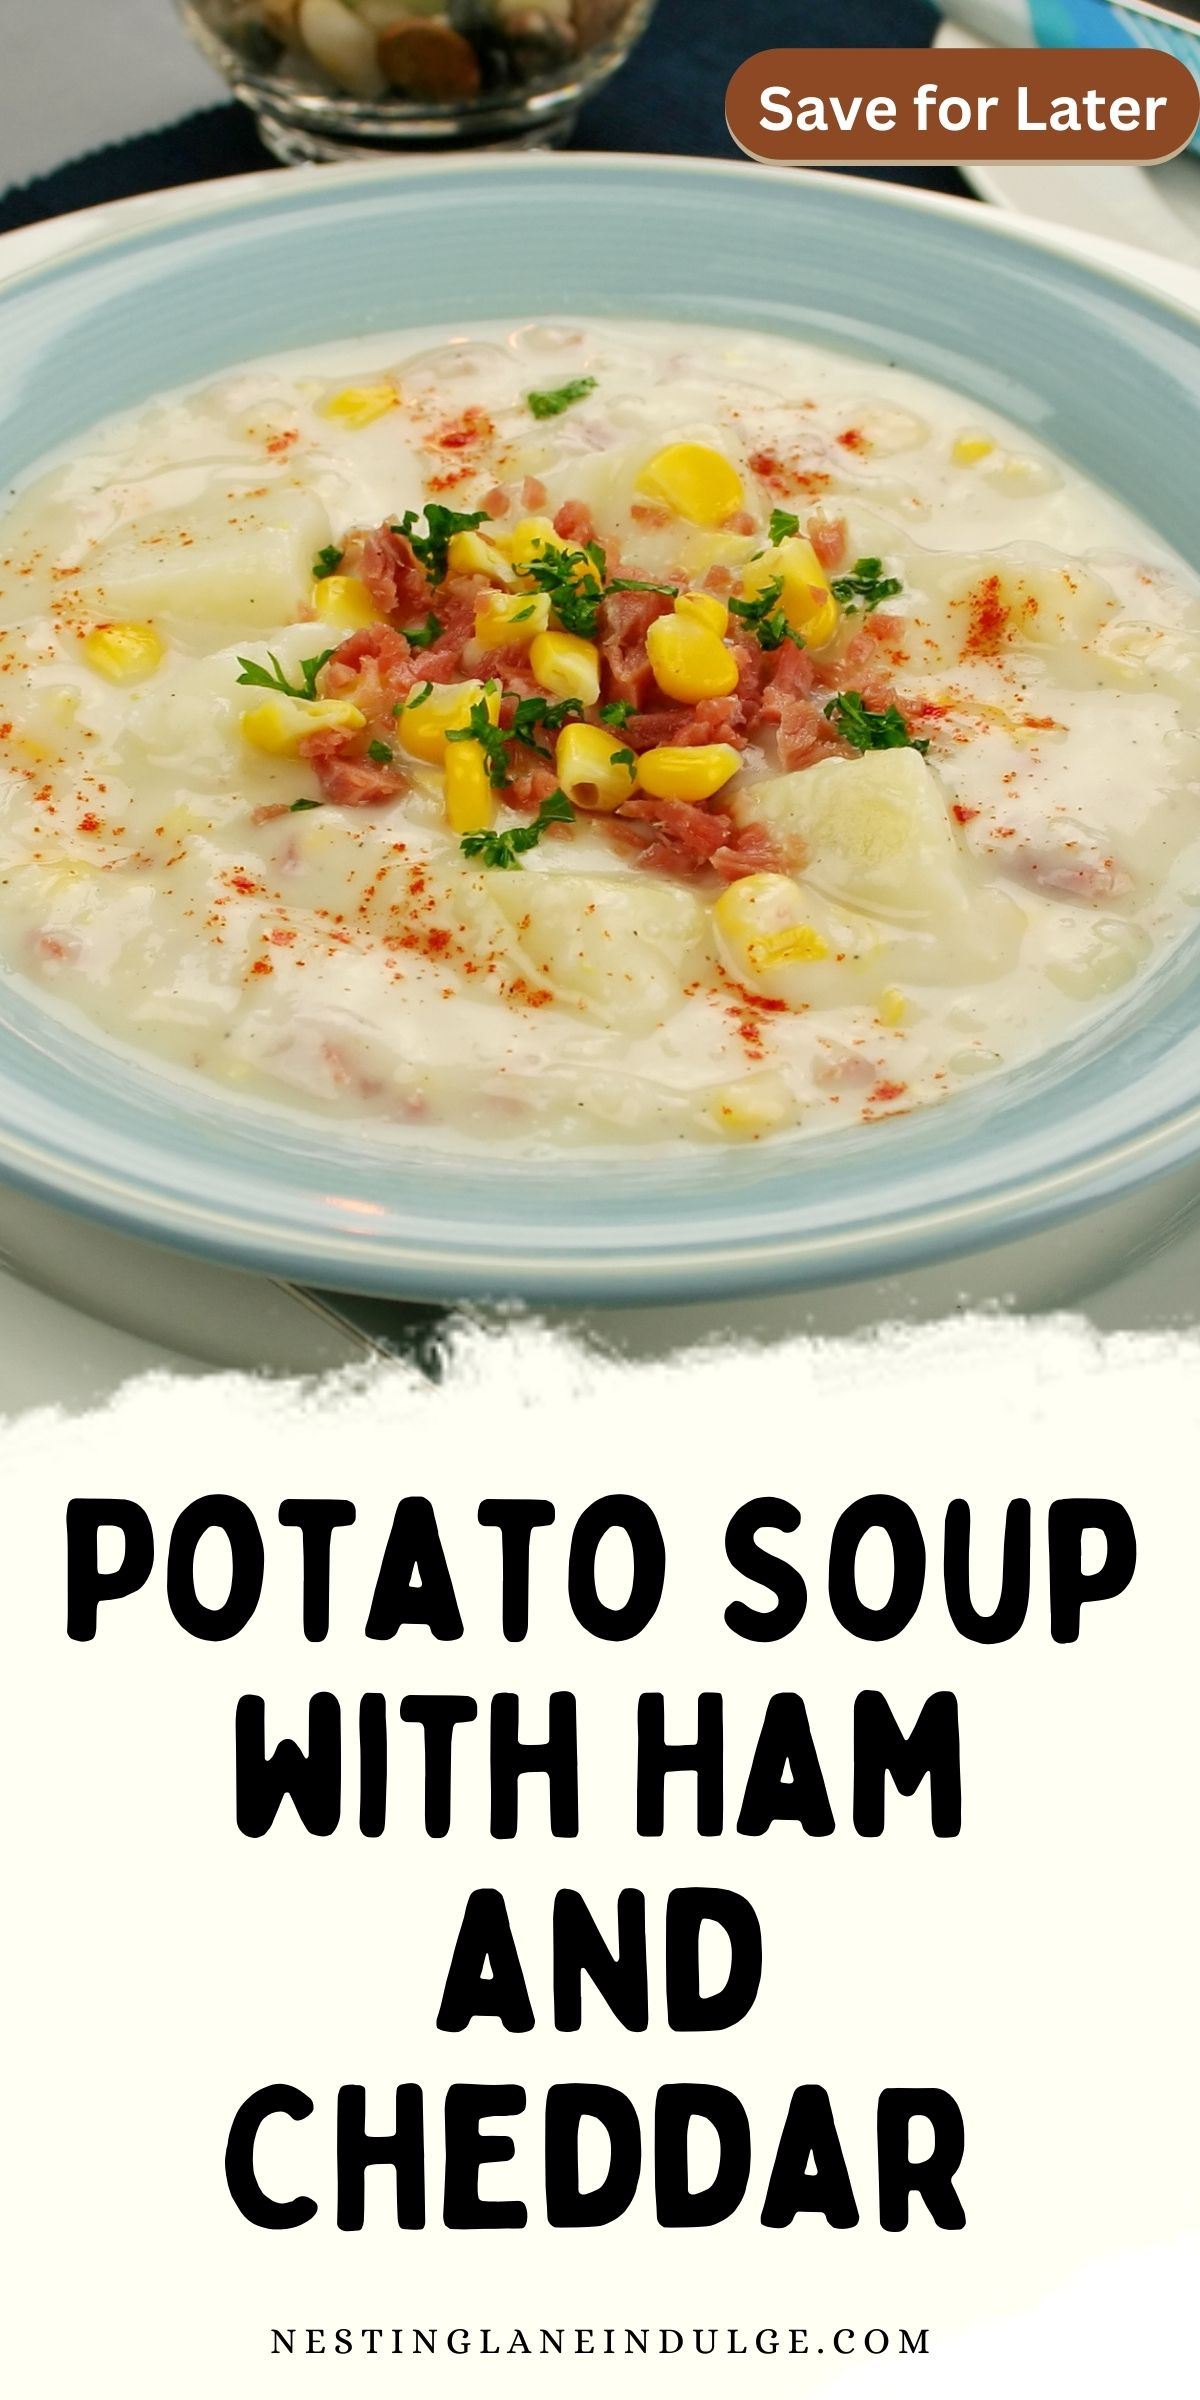 Potato Soup with Ham and Cheddar Graphic.